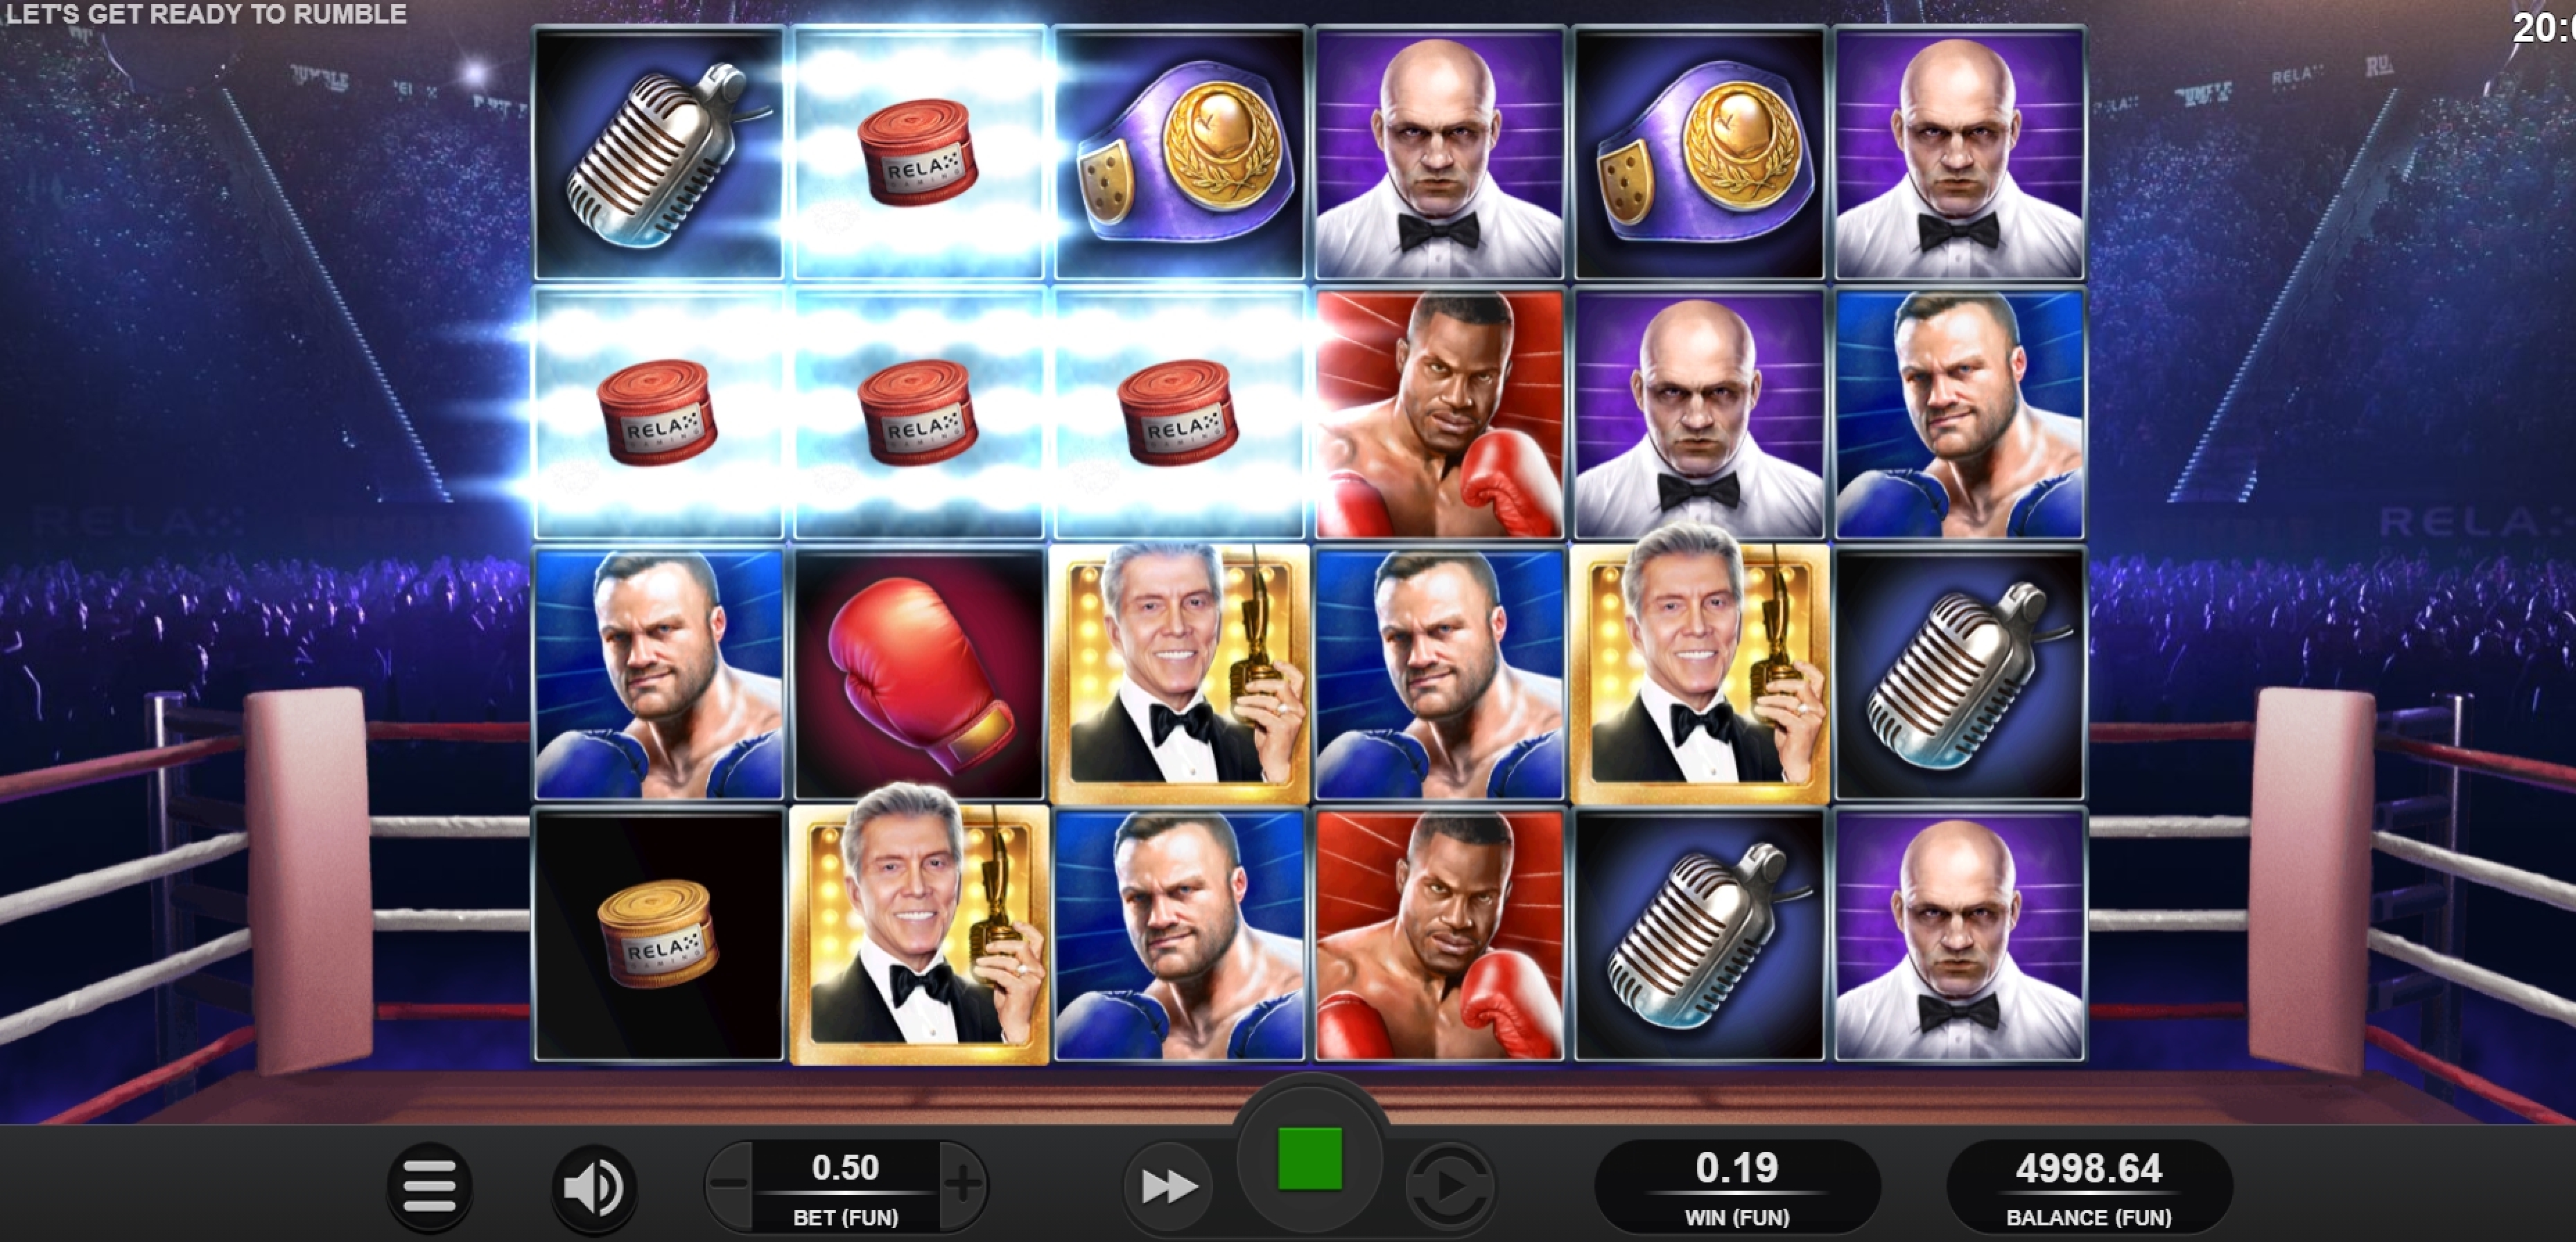 Win Money in Let's Get Ready to Rumble Free Slot Game by Relax Gaming